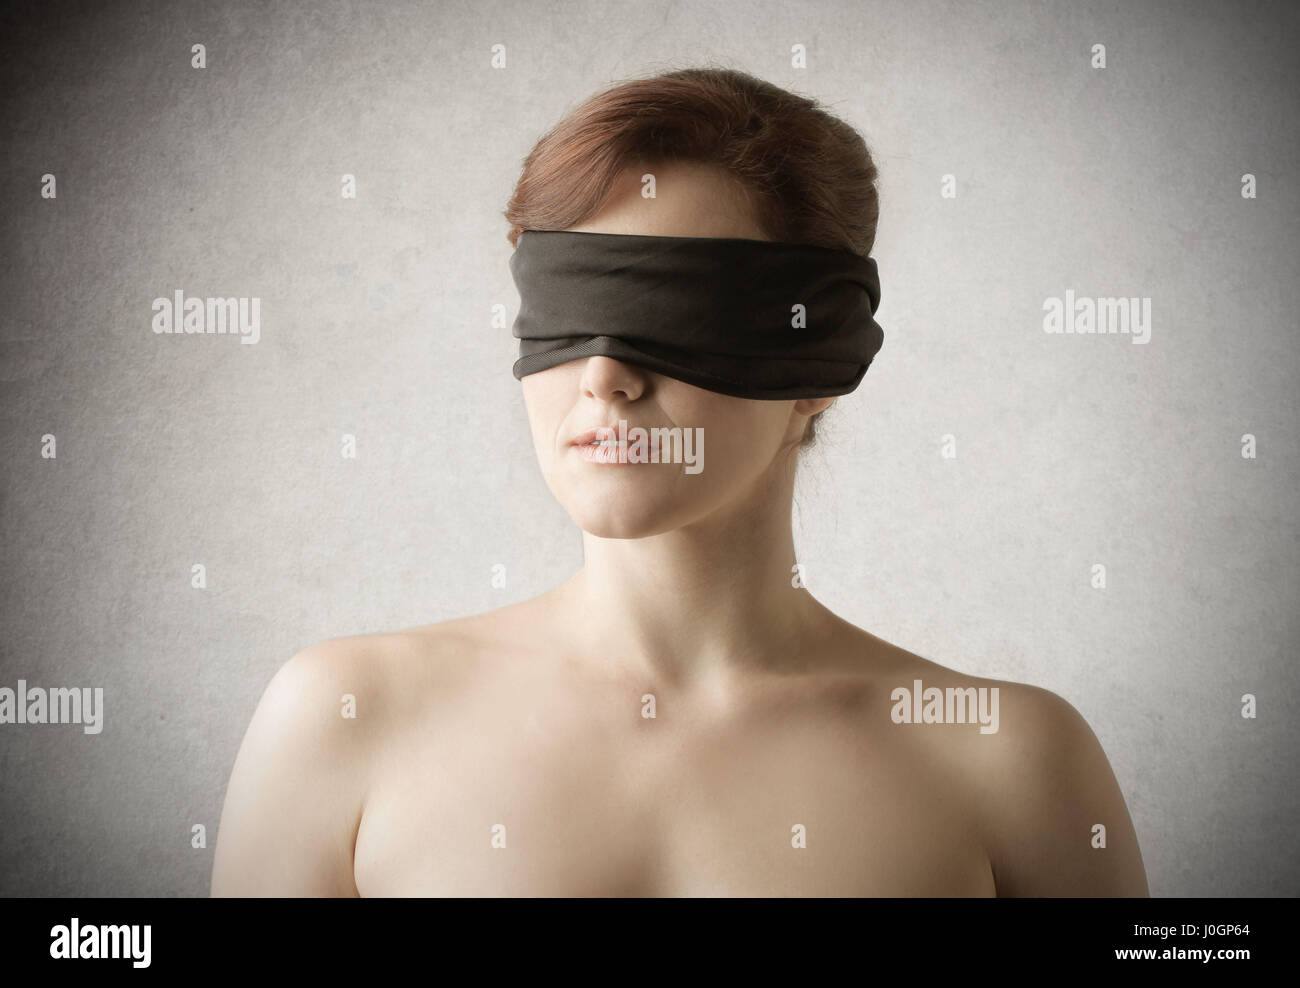 Woman being blindfolded Stock Photo